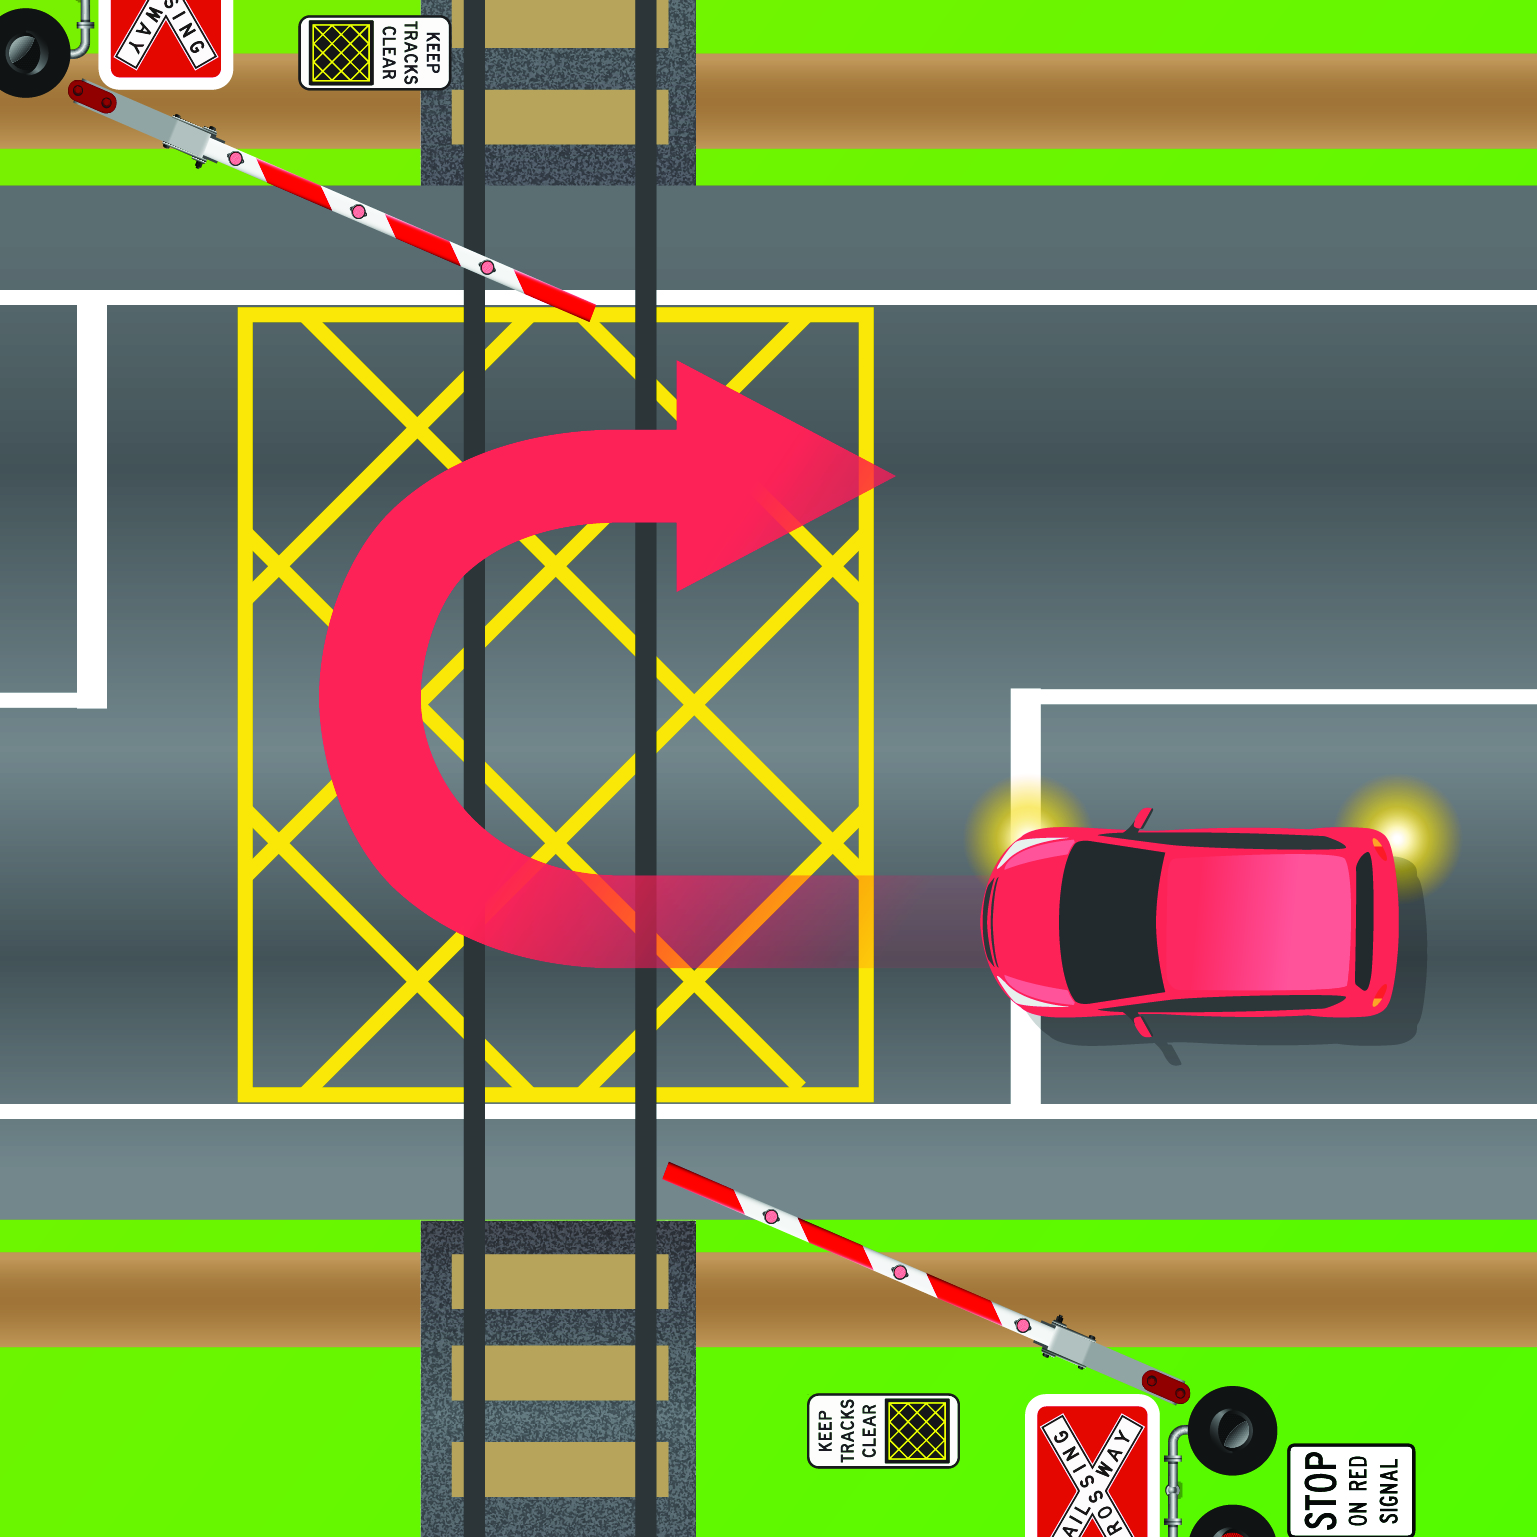 A car making a U-turn at a level crossing, going back the same direction it came from